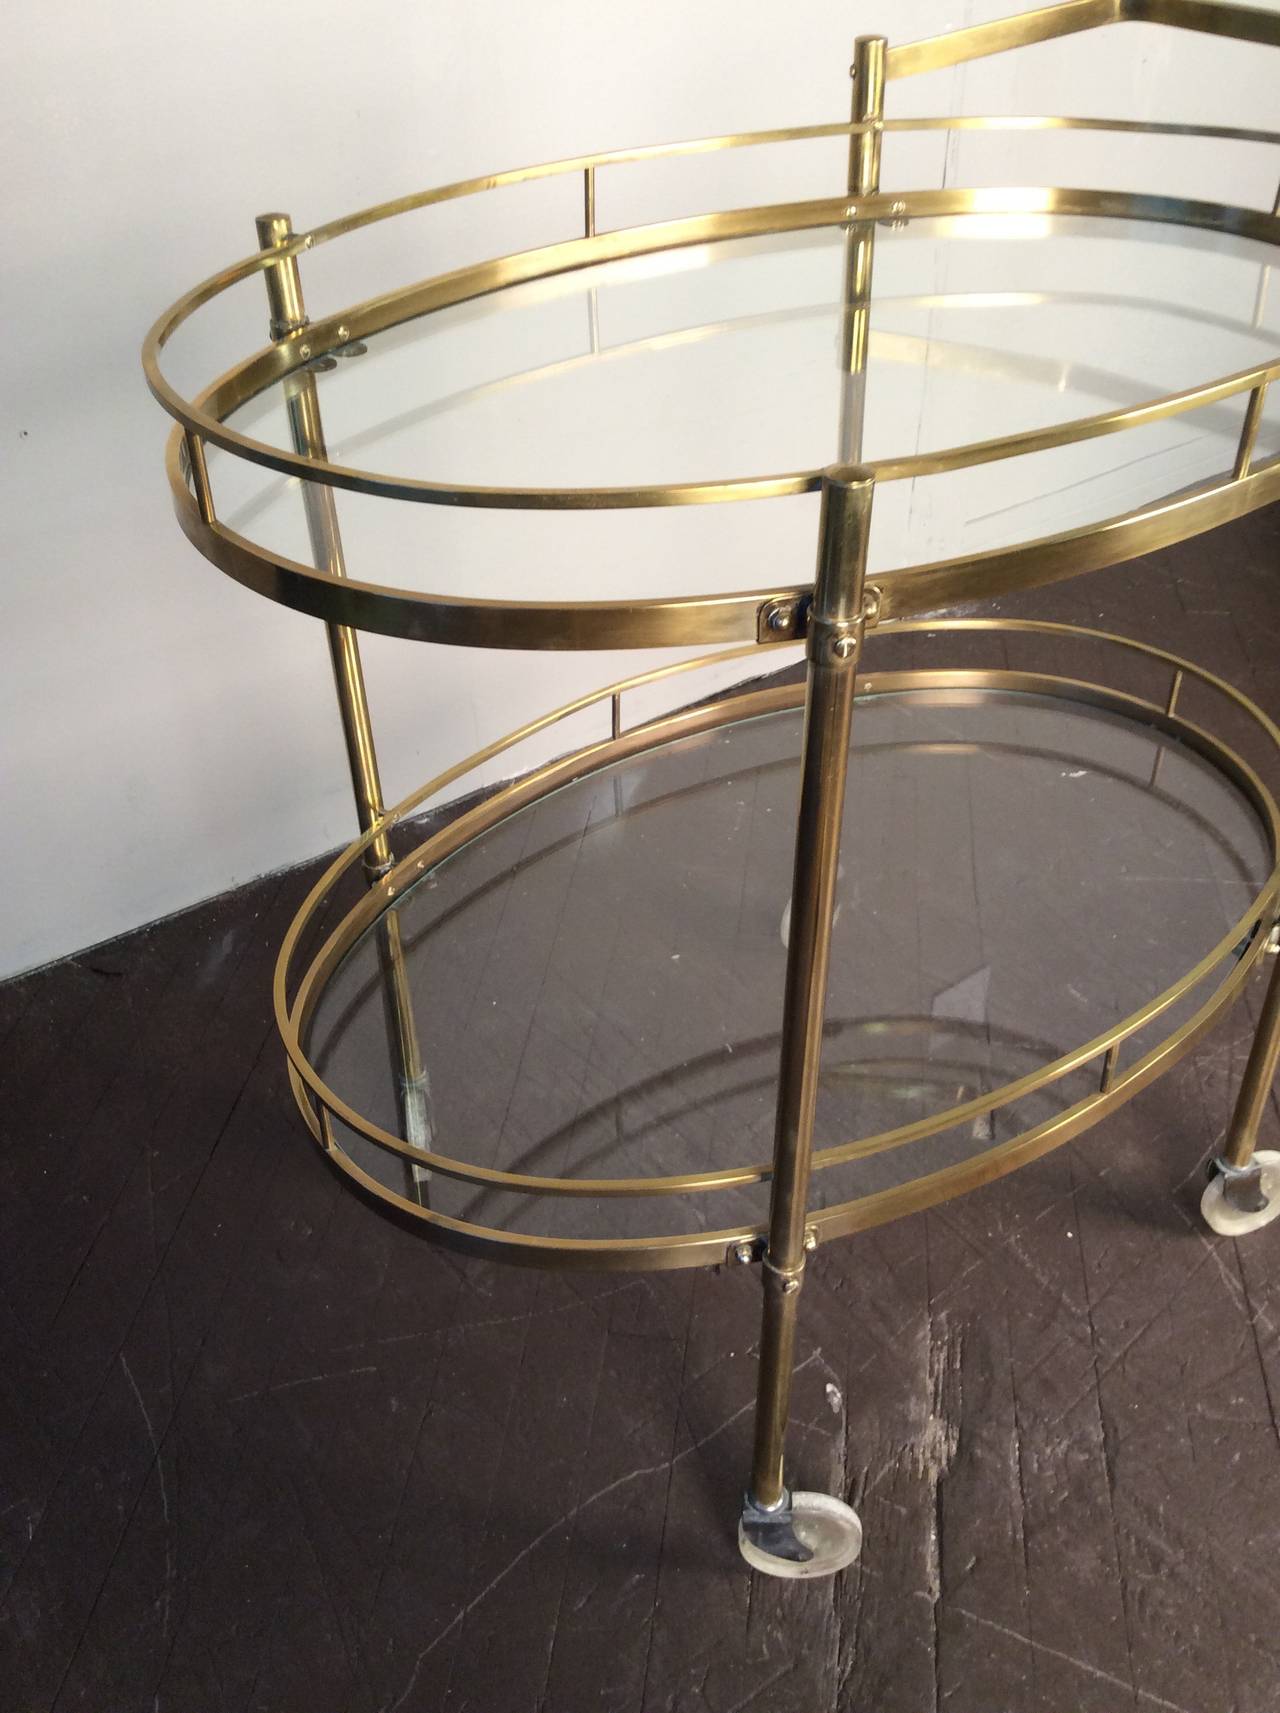 Beautifully patinated solid brass bar cart by Maxwell Phillips, NYC, circa 1960. This piece is in excellent condition. The brass is beautifully polished and warm in tone. Great addition for any cocktail party.